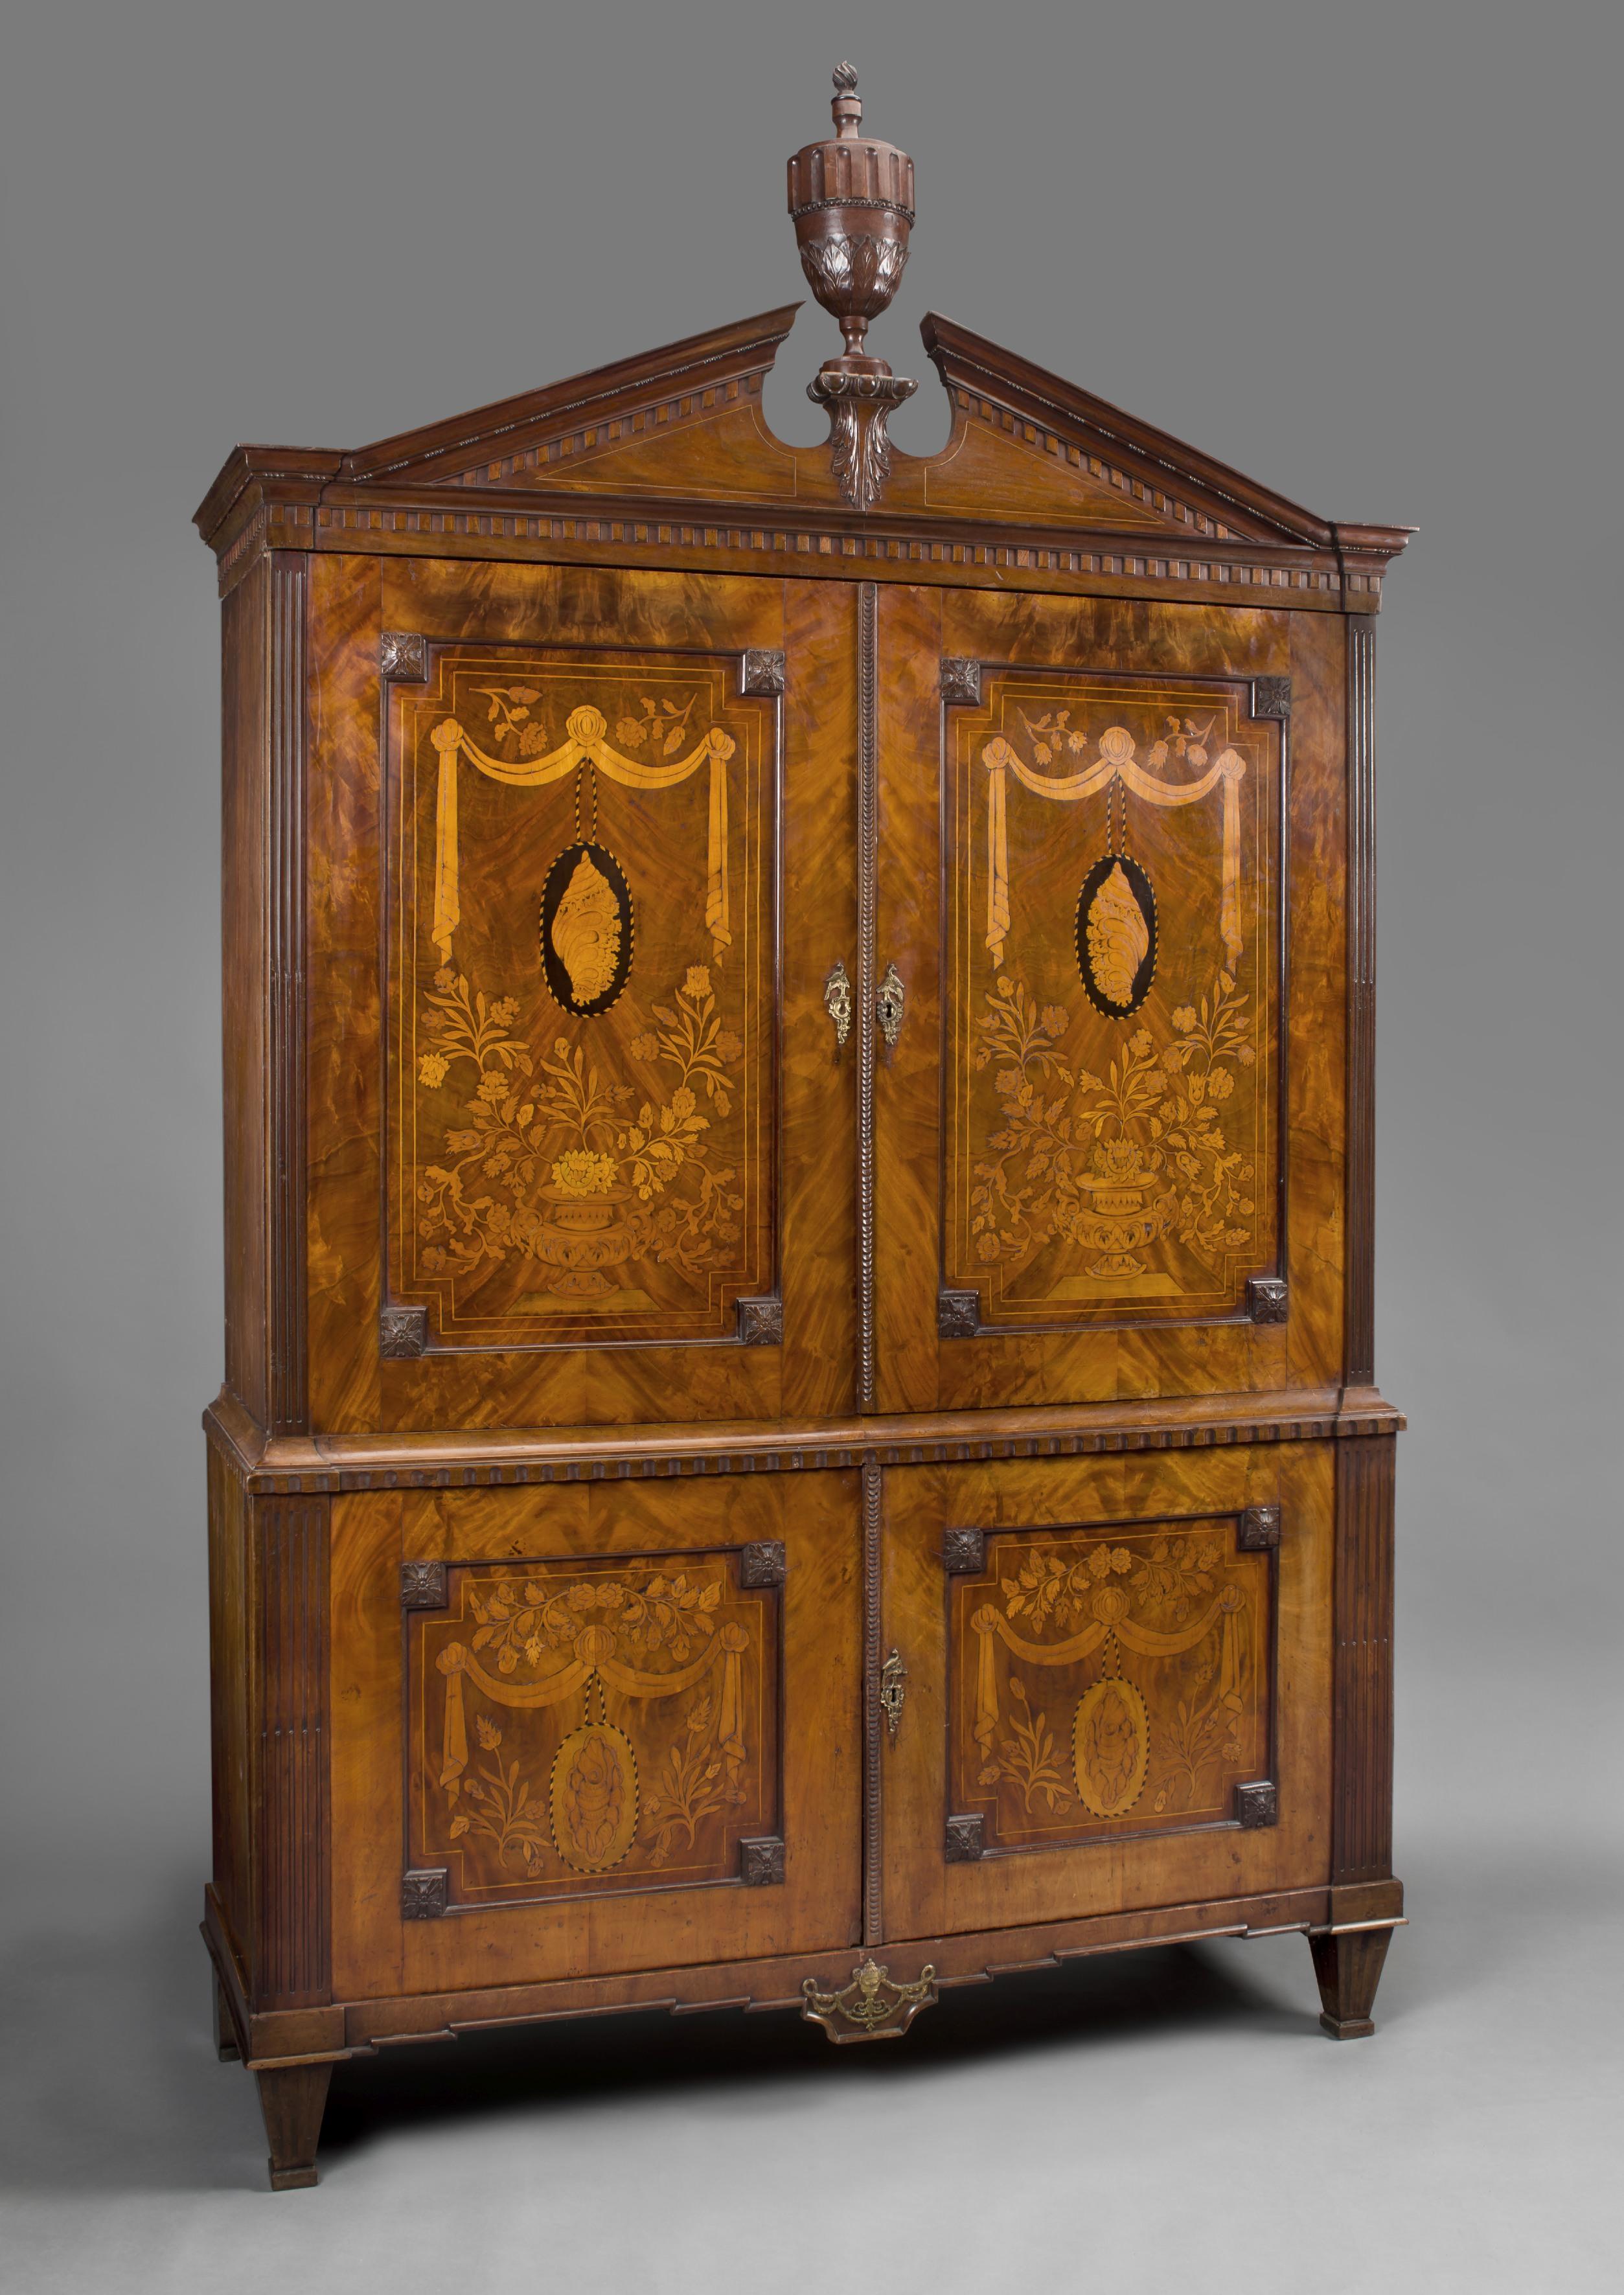 An 18th century Dutch neoclassical mahogany armoire with floral marquetry inlay.

Dutch, circa 1770. The marquetry inlay circa 1860. 

The impressive and very decorative armoire has a moulded broken pediment with a central urn, above panelled